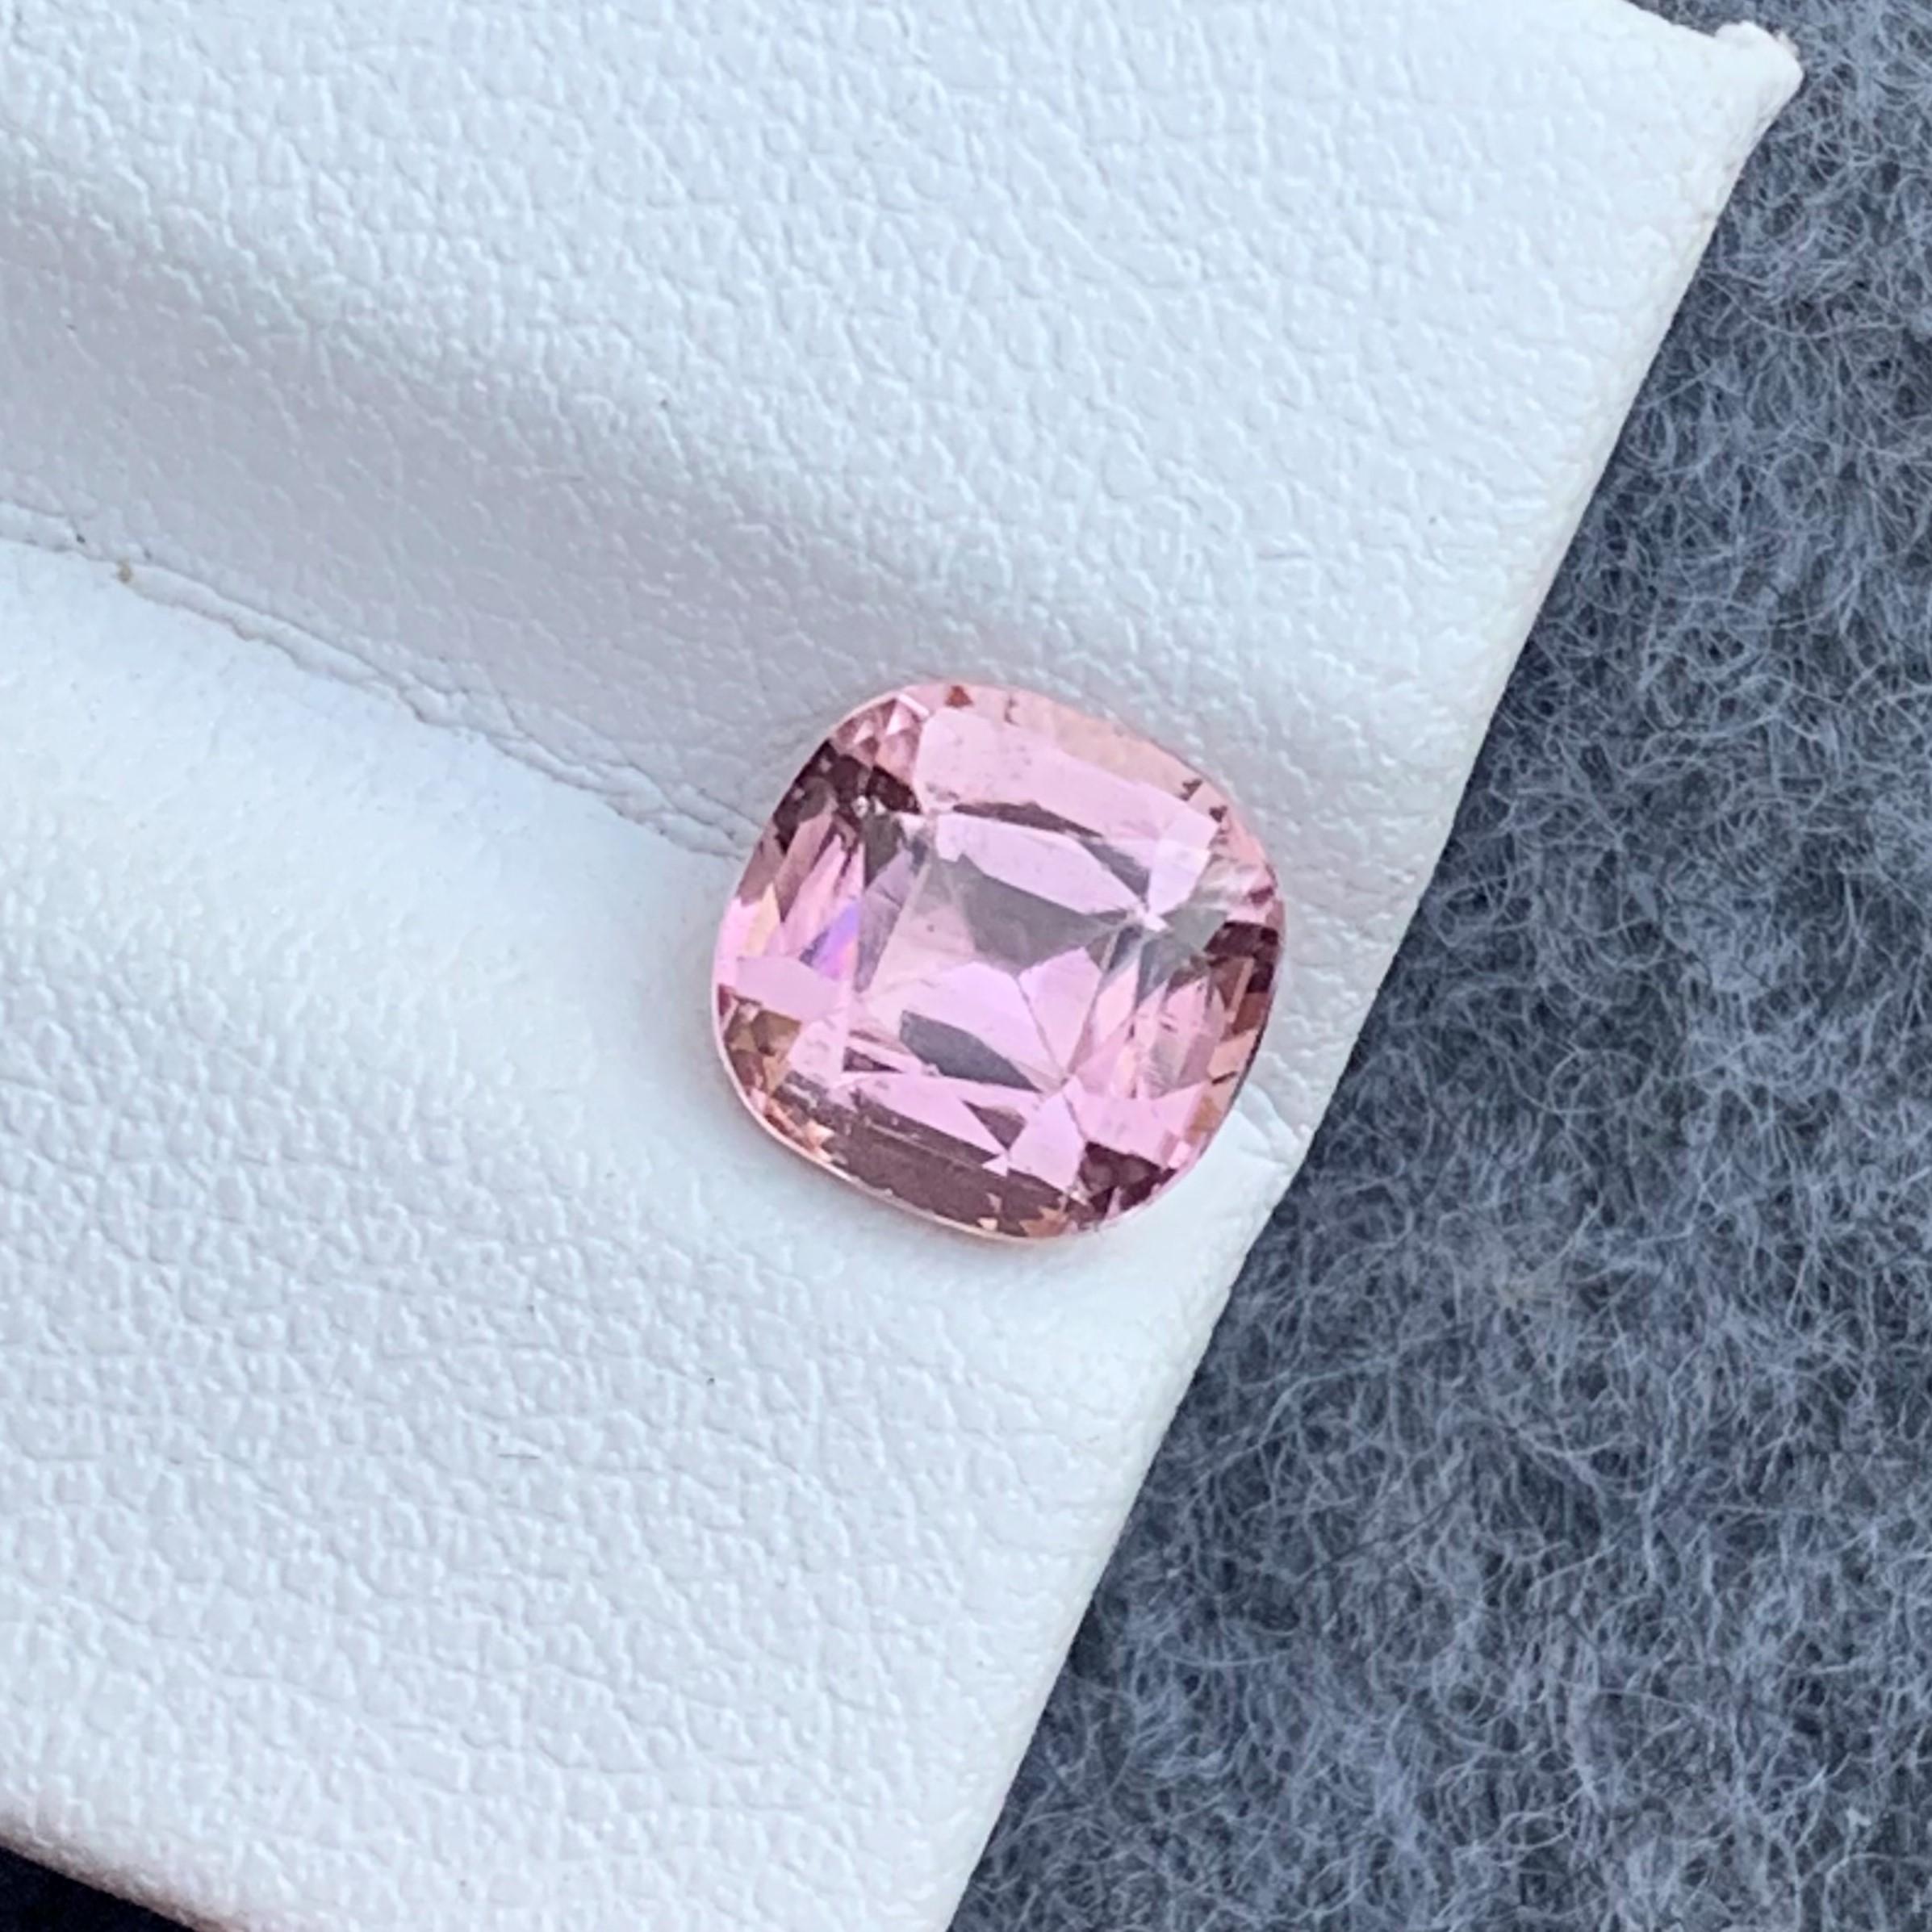 Gemstone Type : Tourmaline
Weight : 2.15 Carats
Dimensions : 7.7x7.5x5.3 Mm
Origin : Kunar Afghanistan
Clarity : SI
Shape: Cushion
Color: Light Pink
Certificate: On Demand
Basically, mint tourmalines are tourmalines with pastel hues of light green